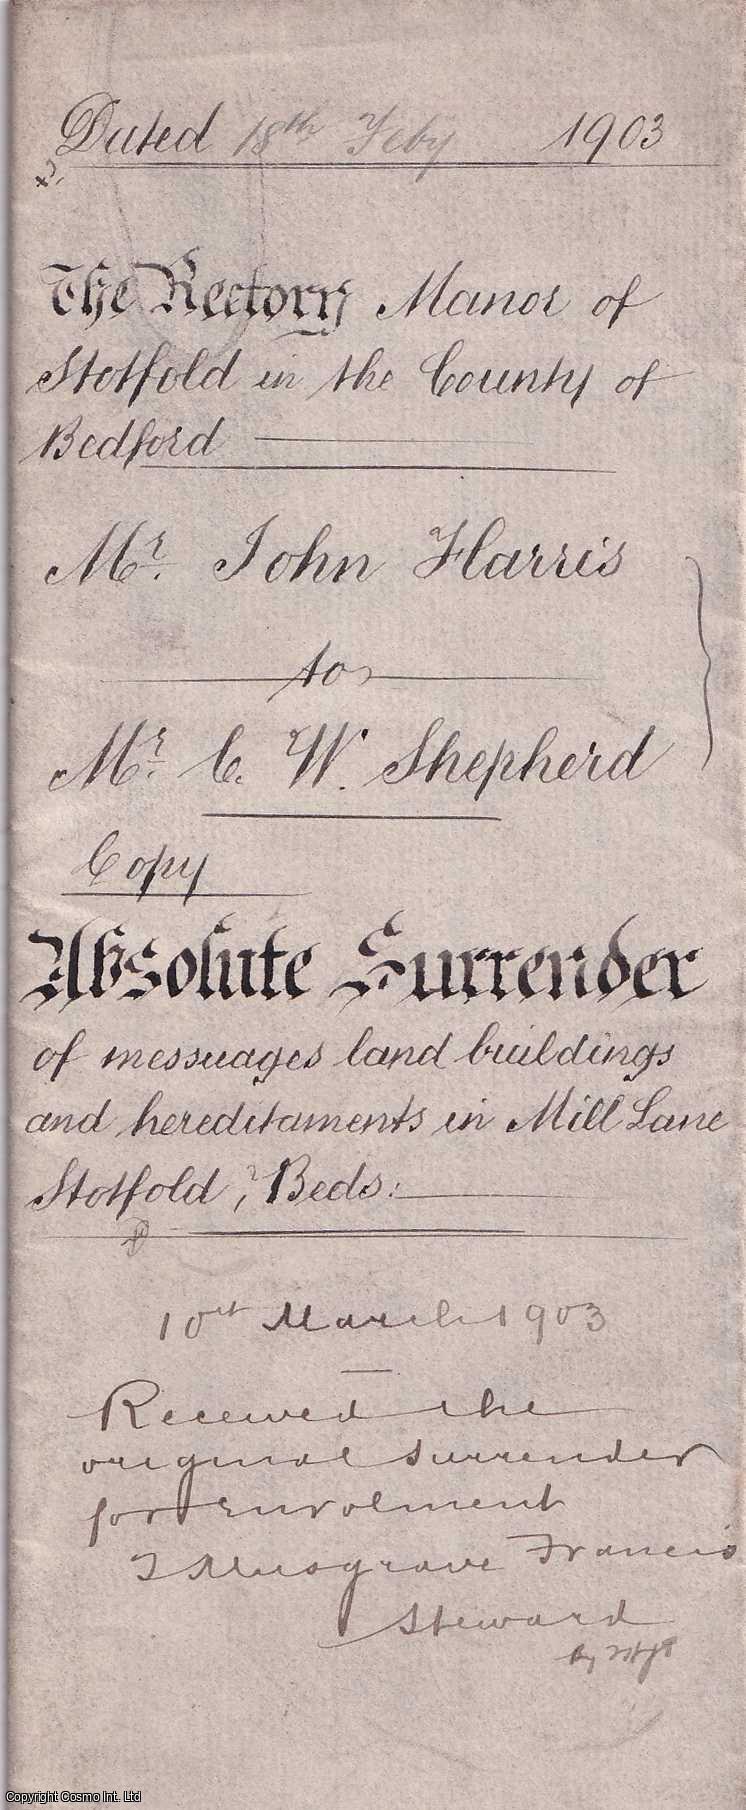 1903 Surrender of Land, Stotford, Beds. - Absolute Surrender of land, buildings and hereditaments in Mill Lane, Stotford, Bedfordshire from Mr John Harris to Mr Cordwell Westhope Shepherd according to the custom of the Manor. Neatly handwritten in ink on folded paper 9.5 x 15 inches. Signed.